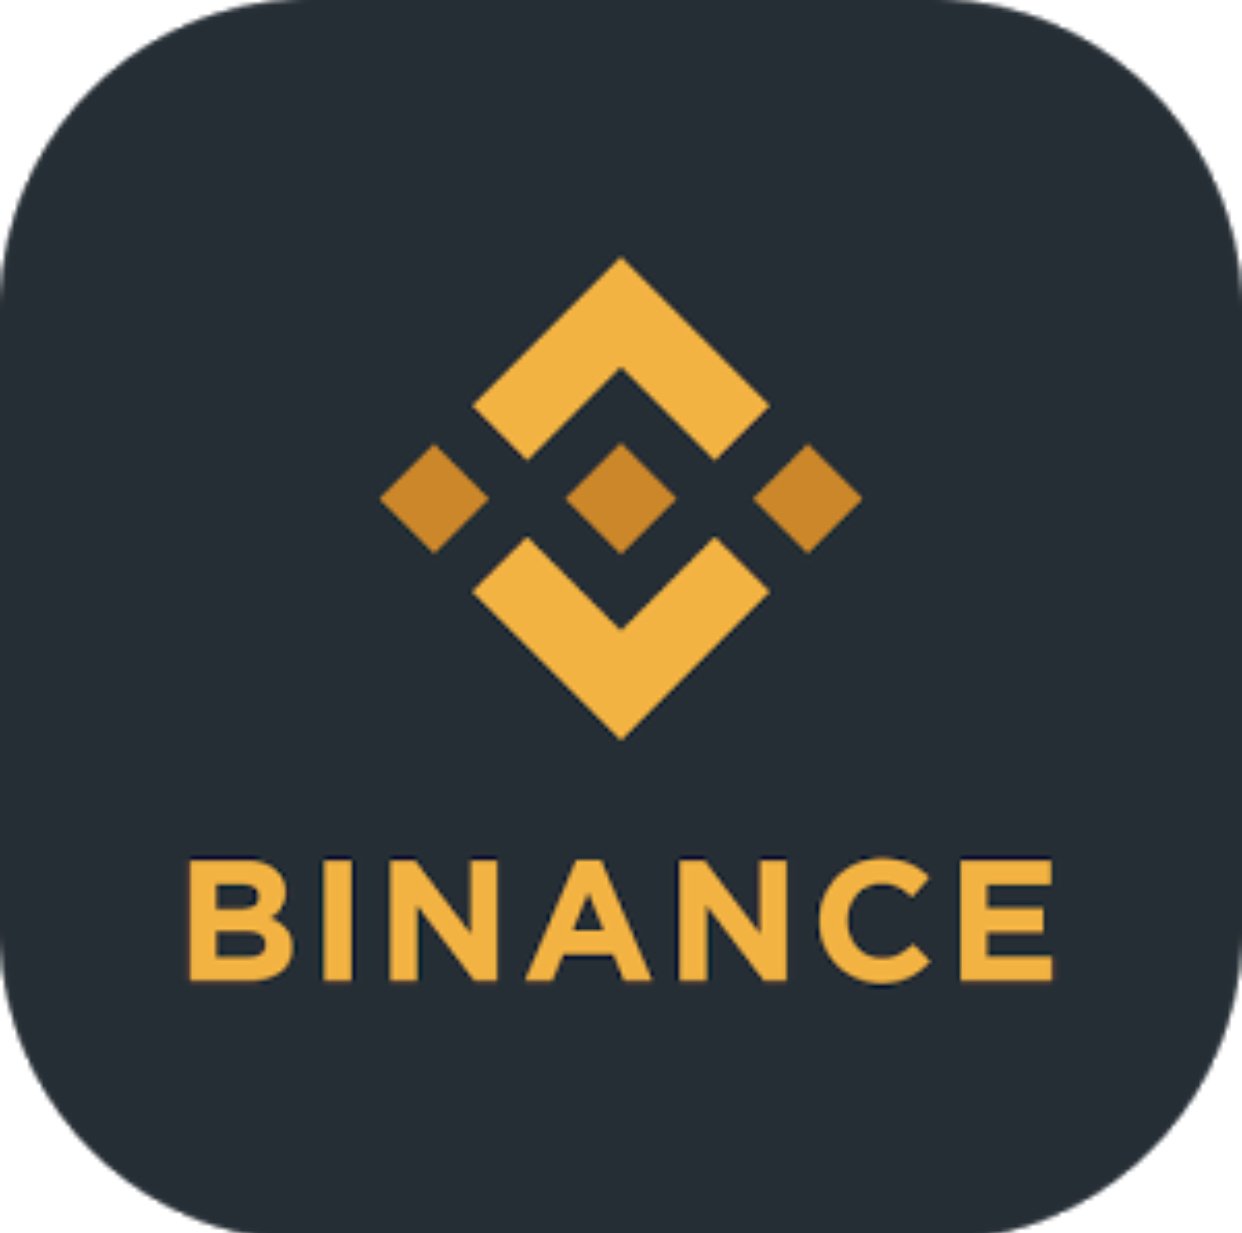 Increase your balance by 200-500% everyday with Binance Trading | https://t.co/pGVbv9QSdT | Make profit everyday